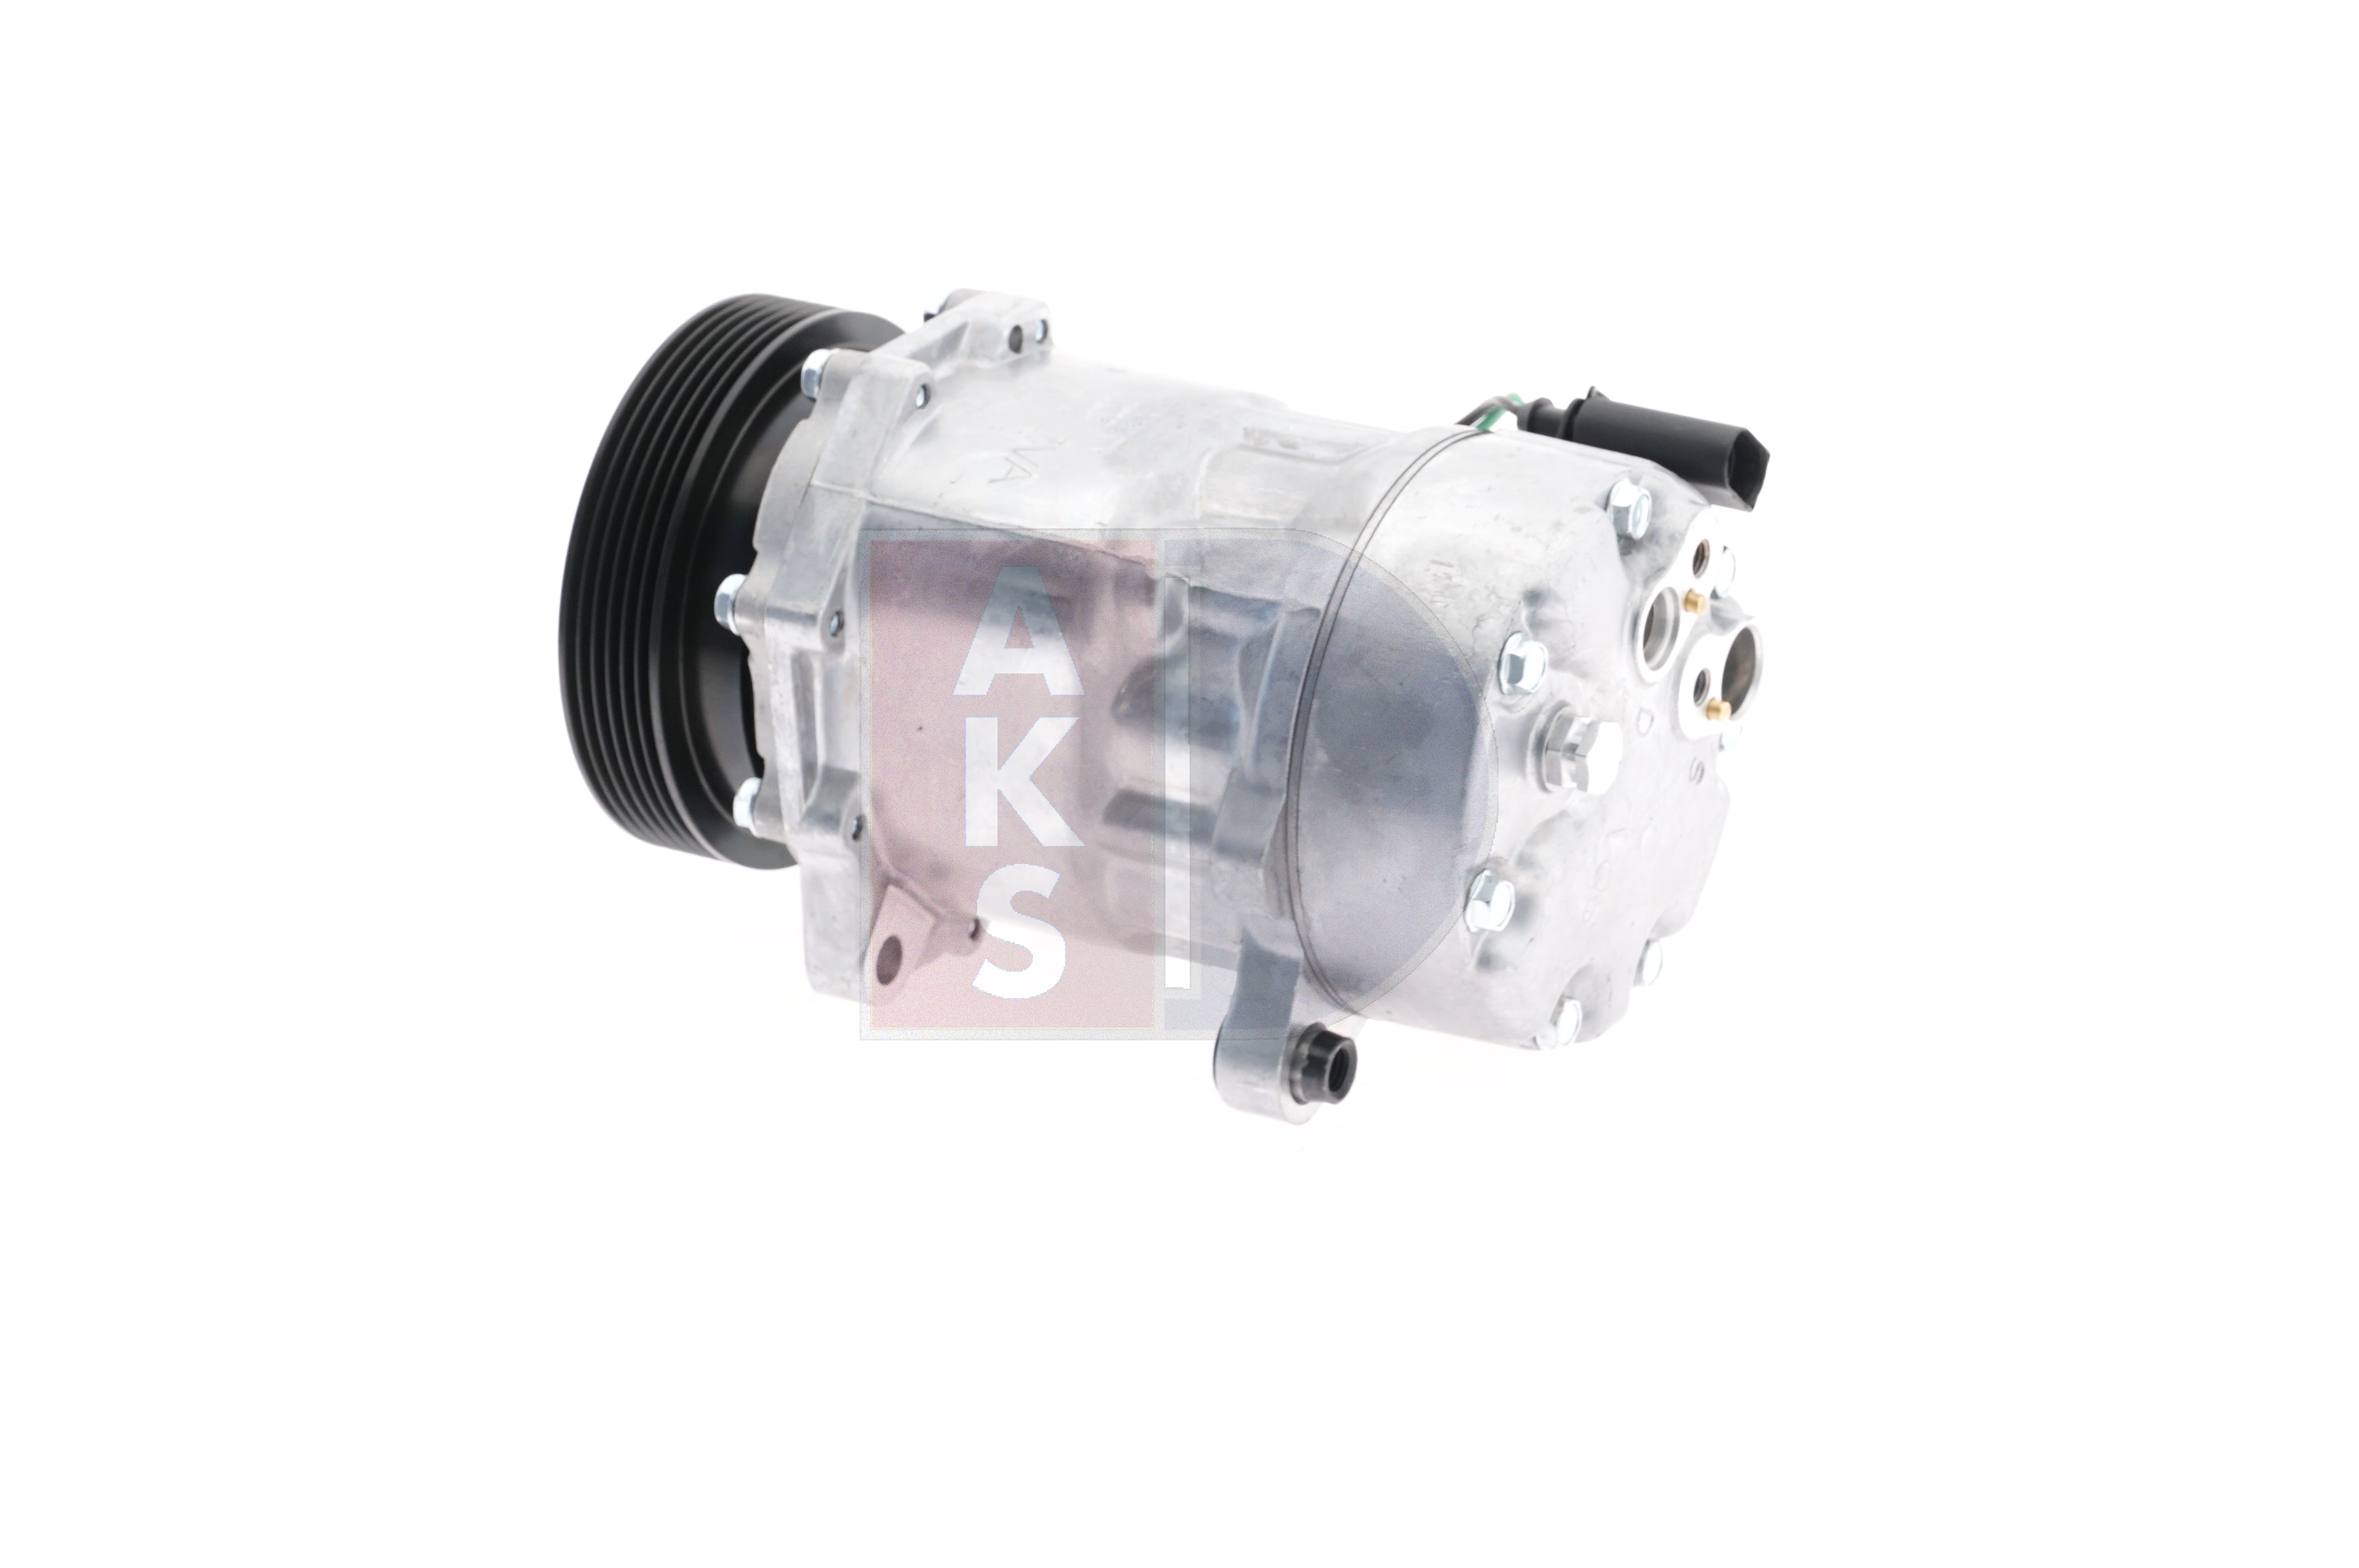 AKS DASIS 851770N Air conditioning compressor SD7V16, 12V, PAG 46, R 134a, with magnetic clutch